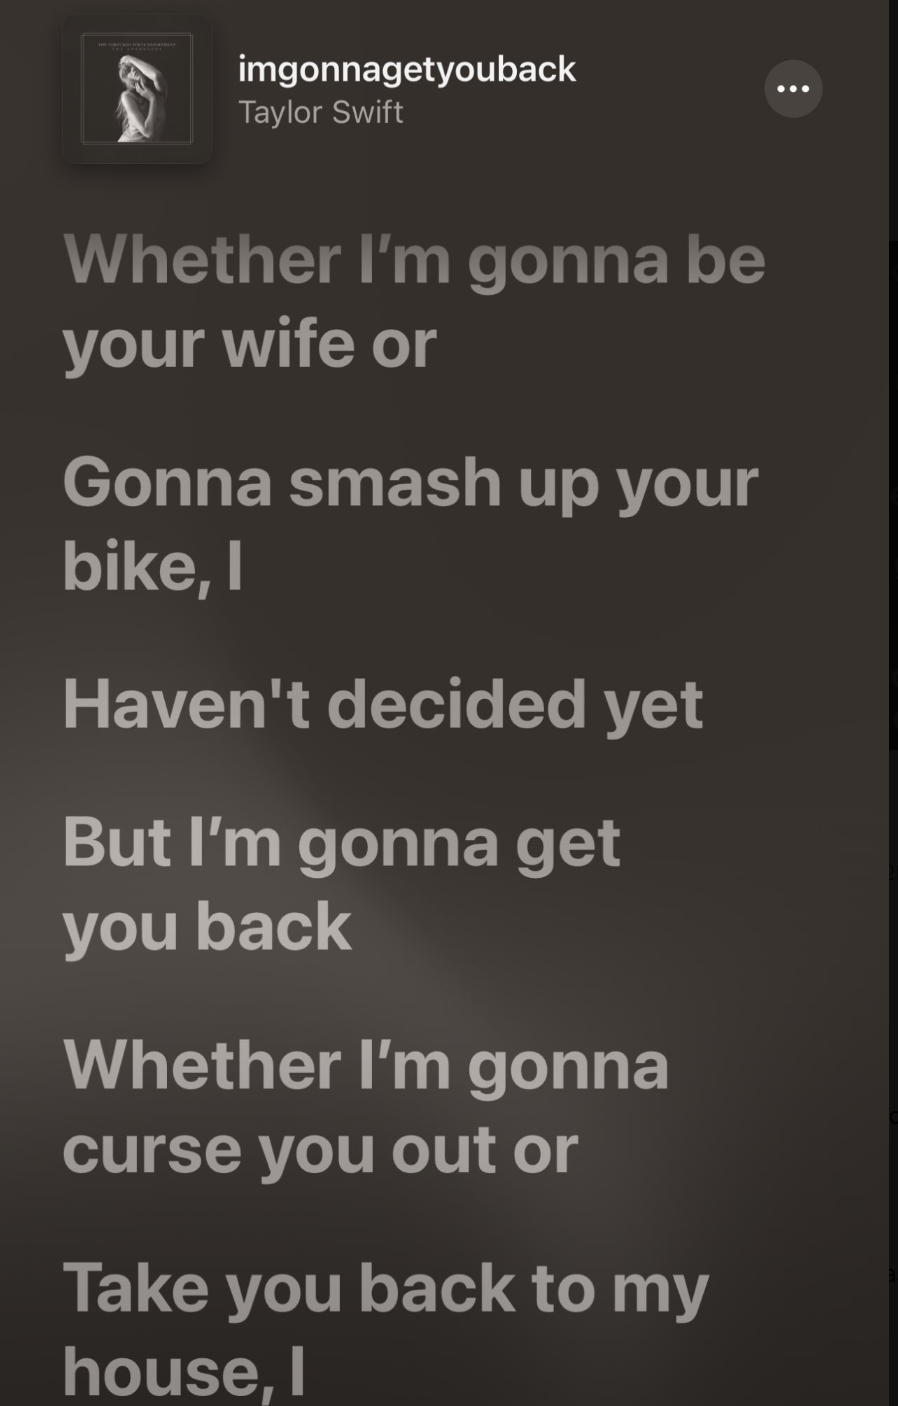 screenshot - imgonnagetyouback Taylor Swift Whether I'm gonna be your wife or Gonna smash up your bike, I Haven't decided yet But I'm gonna get you back Whether I'm gonna curse you out or Take you back to my house, I